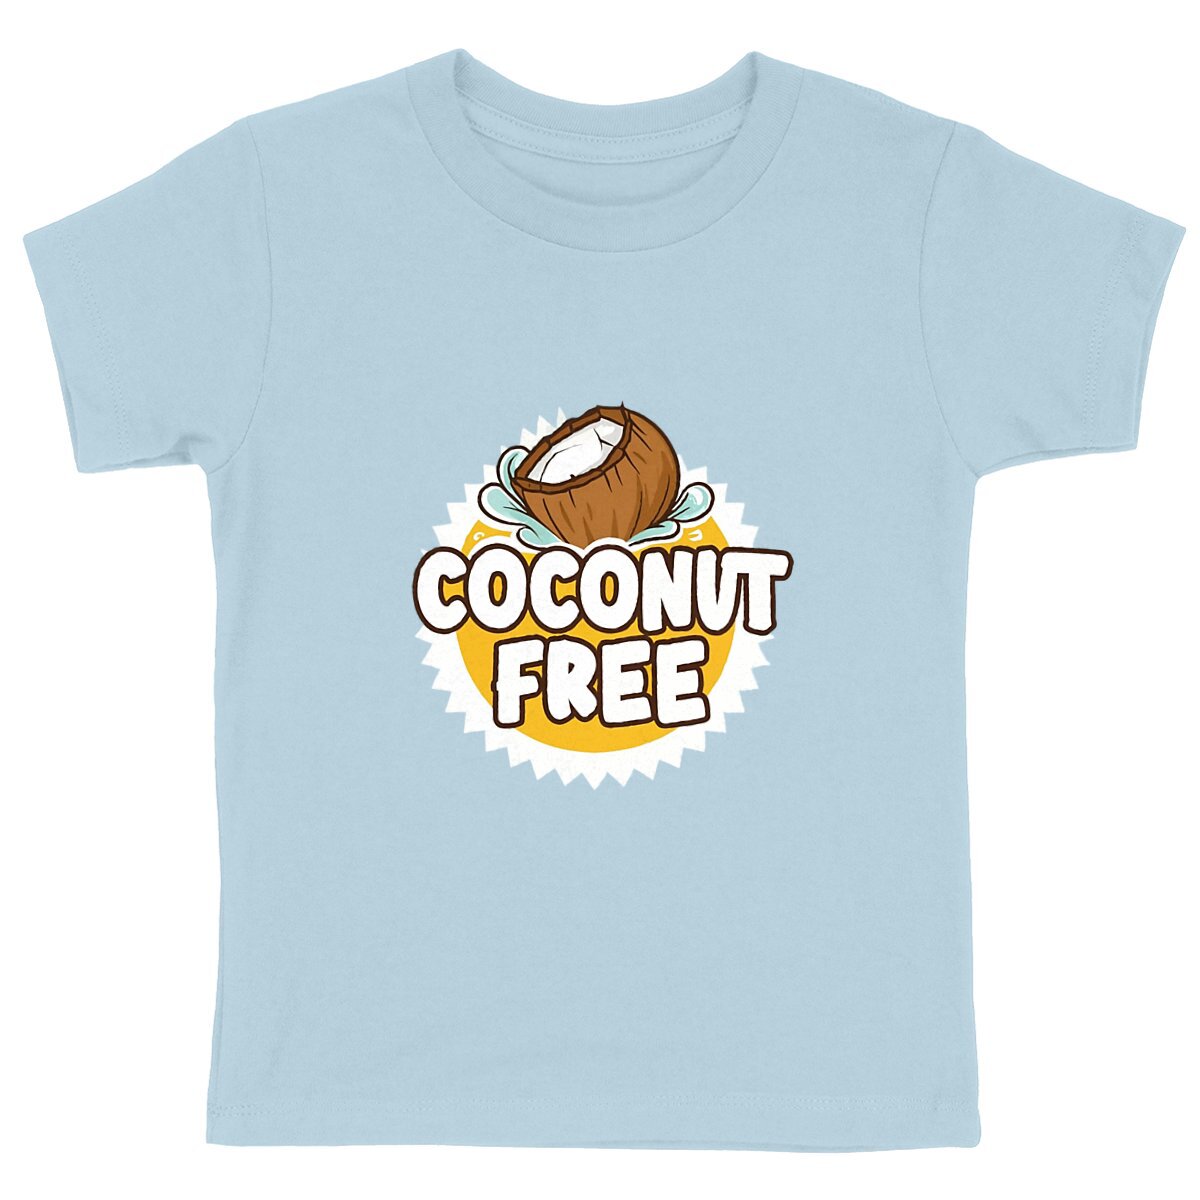 Coconut Free Organic Cotton Graphic Kid's Shirt | Hypoallergenic - Allergy Friendly - Naturally Free